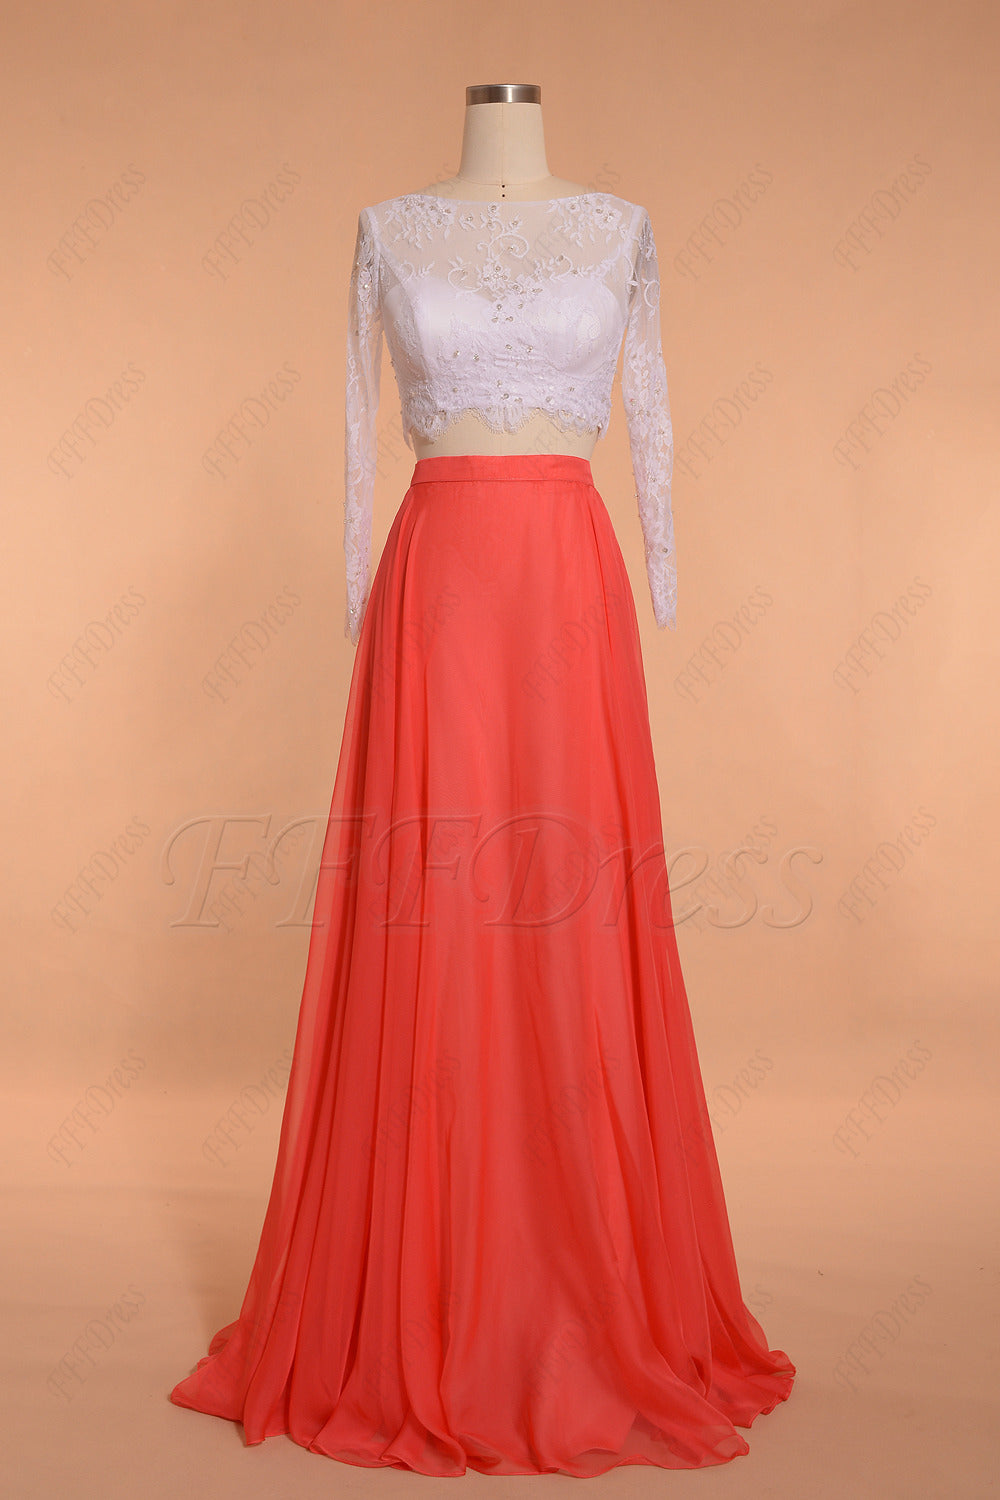 Coral white two piece bridesmaid dresses long sleeves